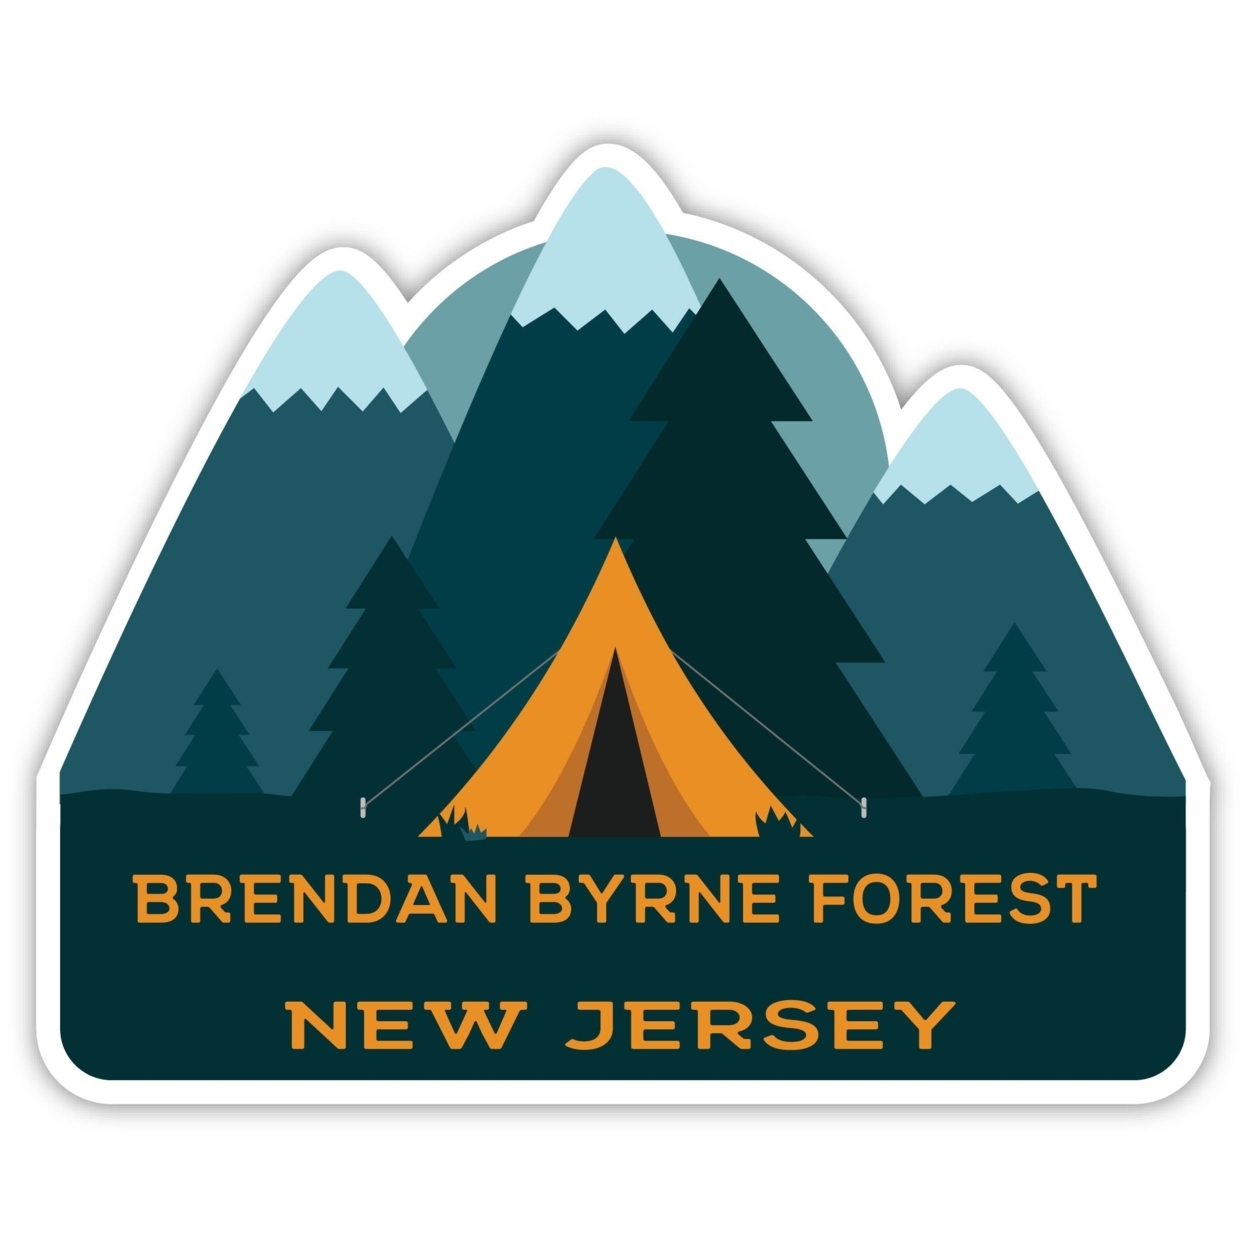 Brendan Byrne Forest New Jersey Souvenir Decorative Stickers (Choose Theme And Size) - 4-Pack, 8-Inch, Tent